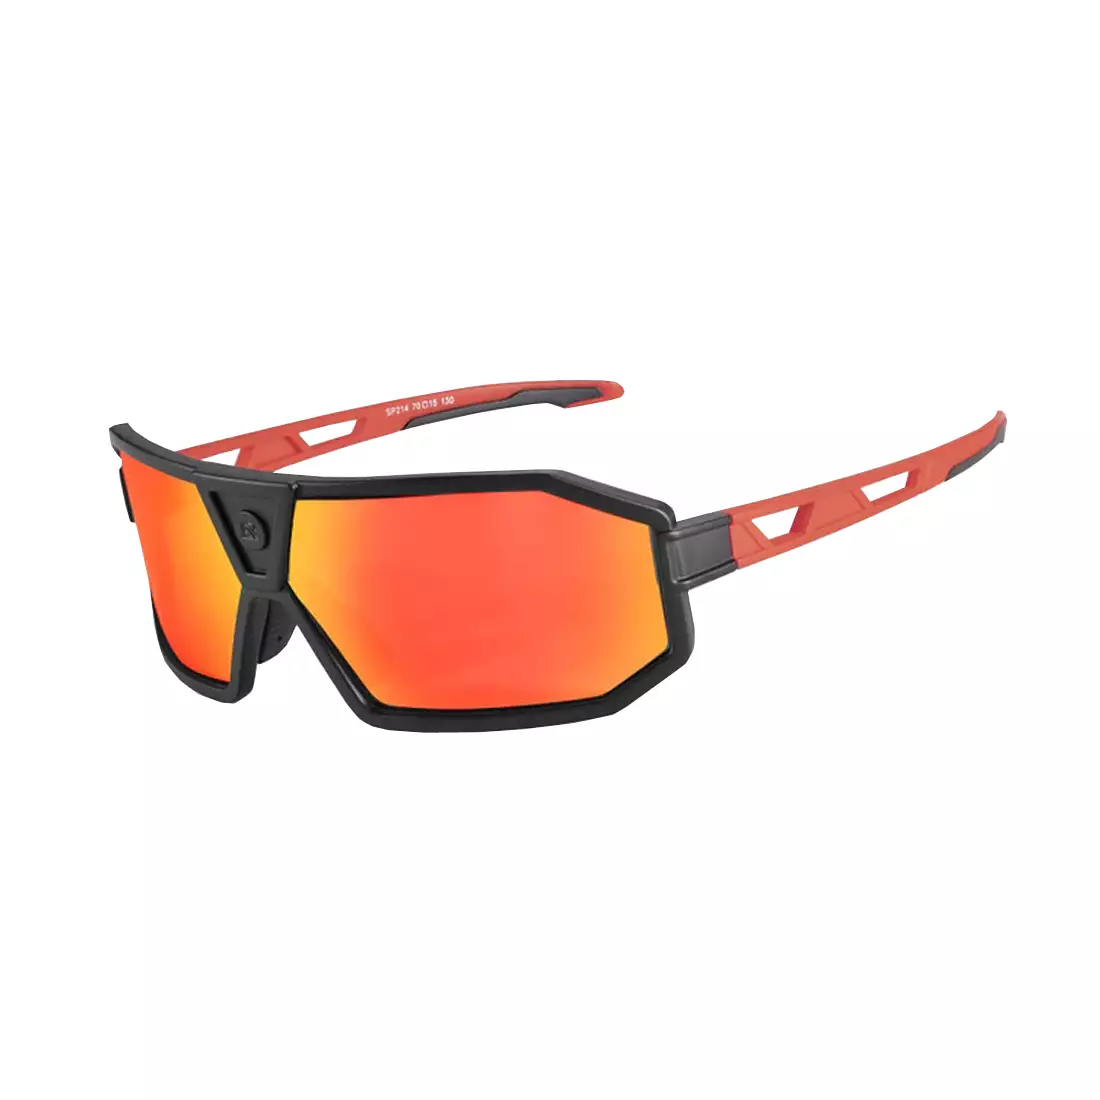 Rockbros SP214BK bicycle / sports glasses with polarized lens black-red